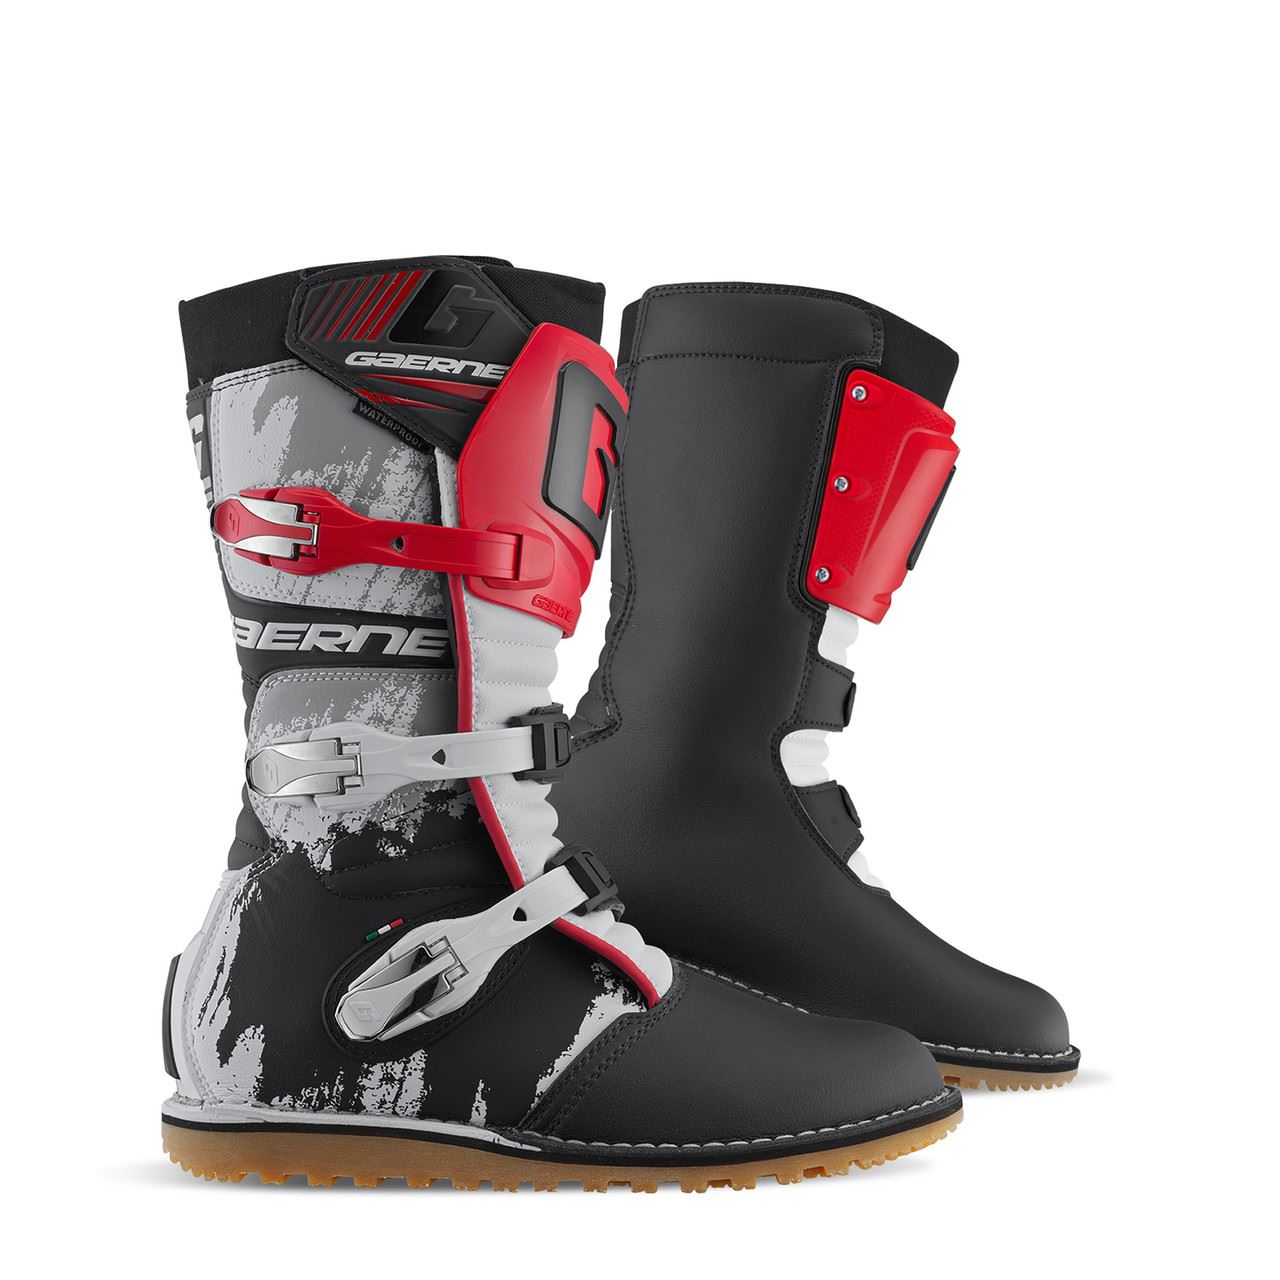 Gaerne Youth Balance Classic Trials Boots Red Black